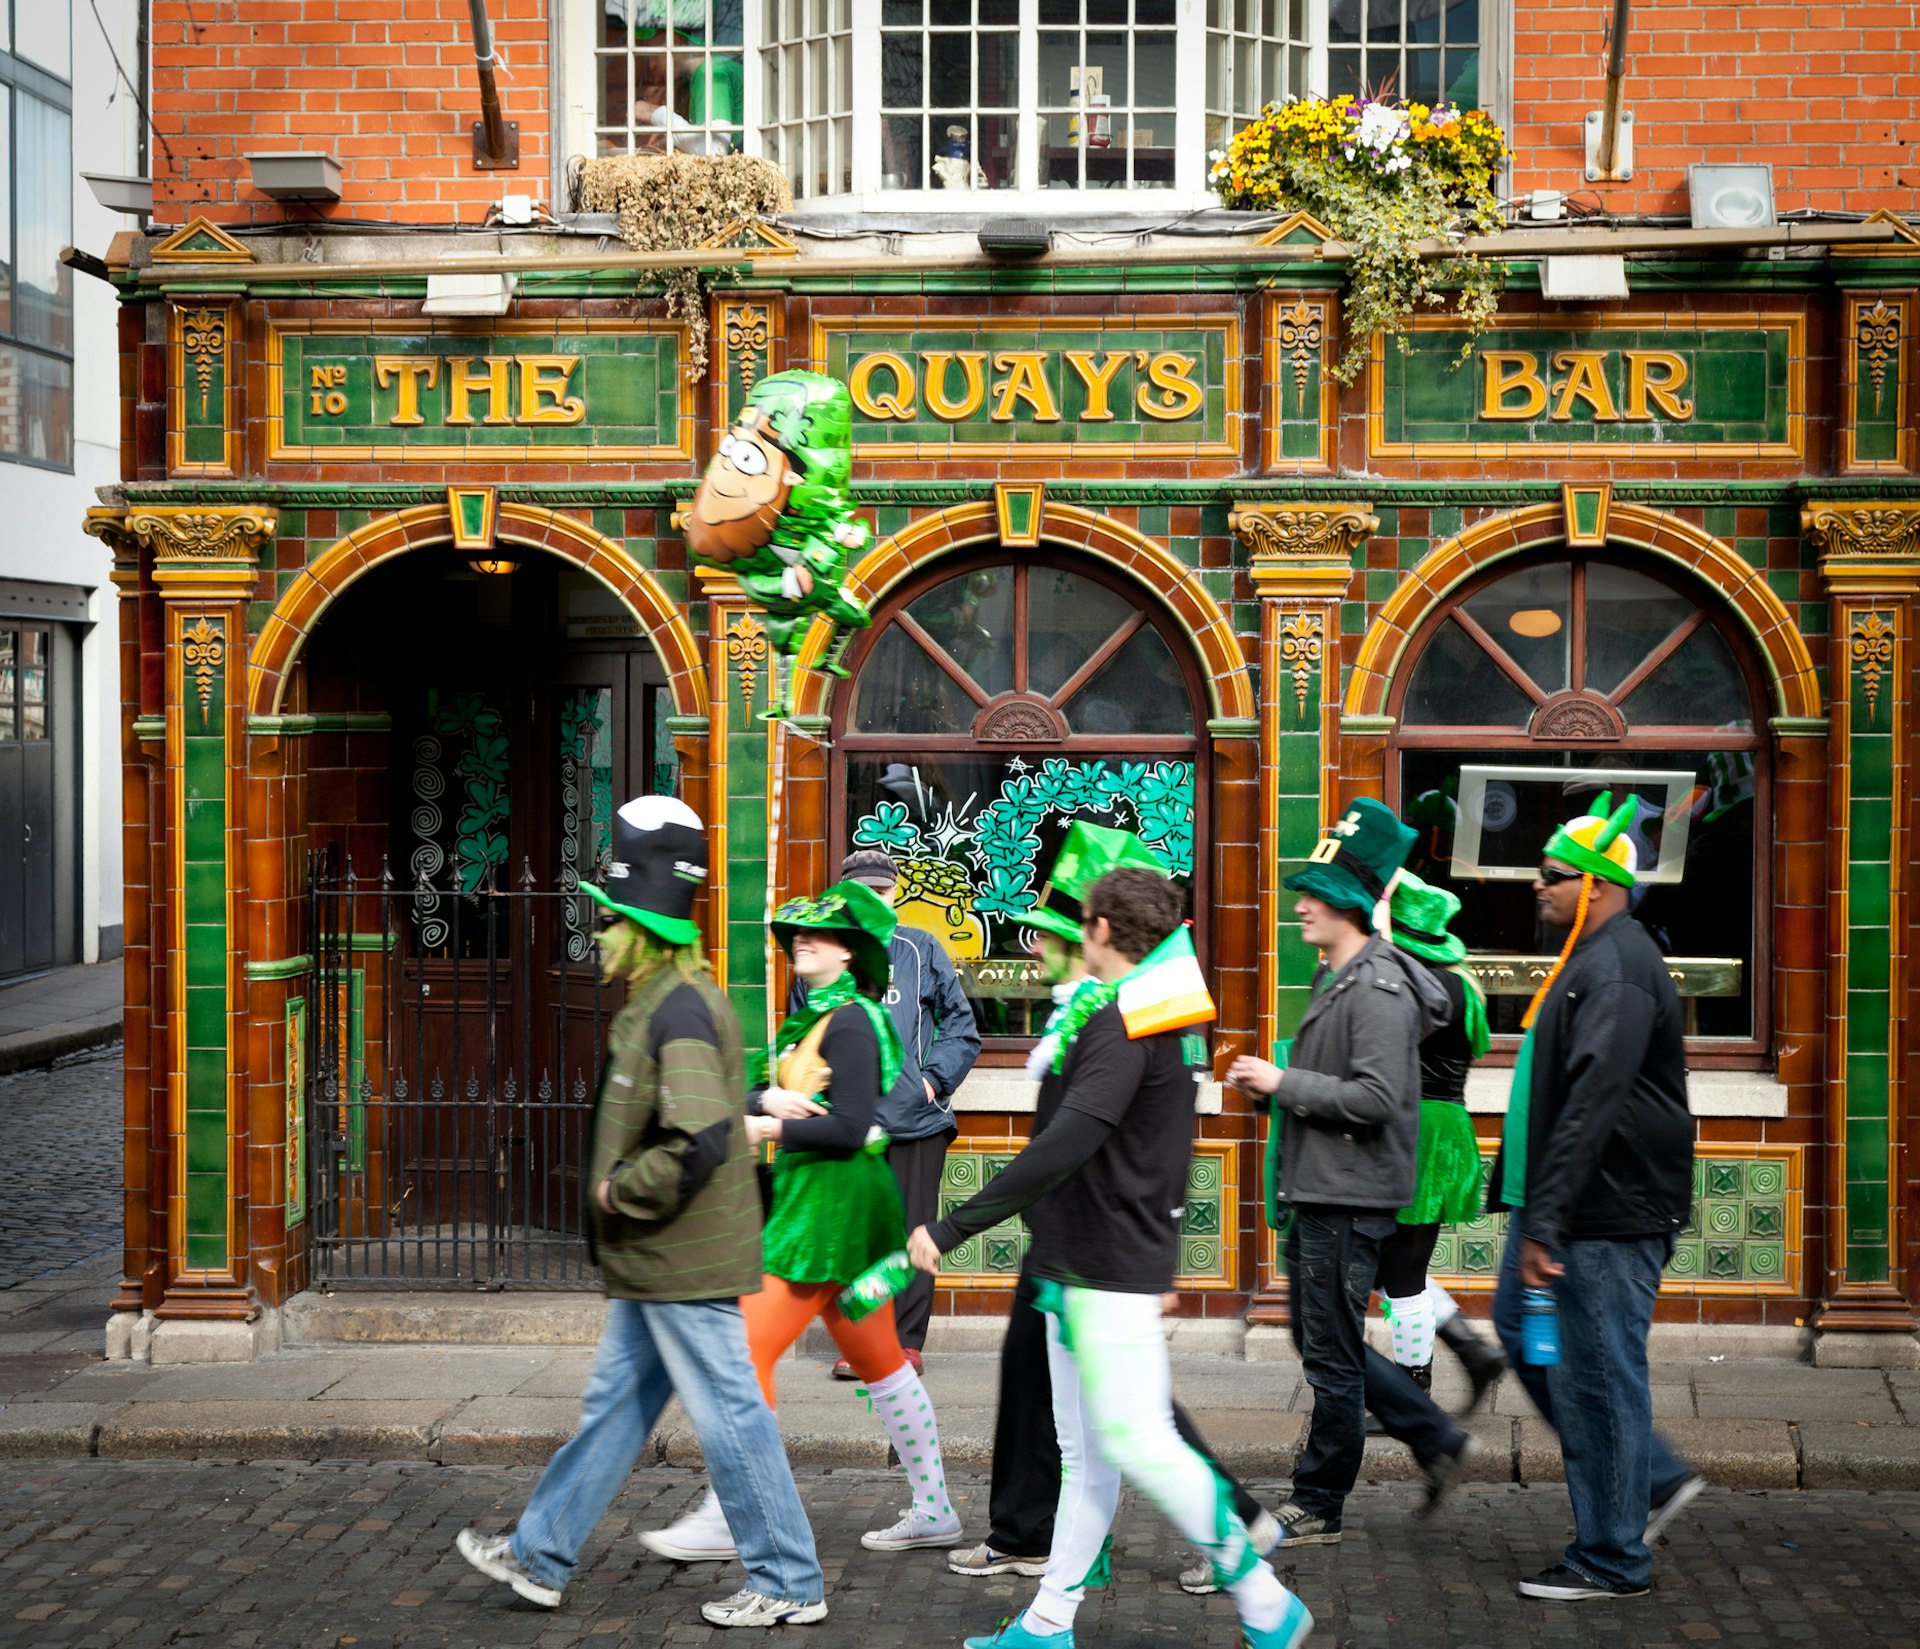 Group of people in costumes Ireland in the Republic of Ireland passing a Dublin pub on St. Patrick's Day